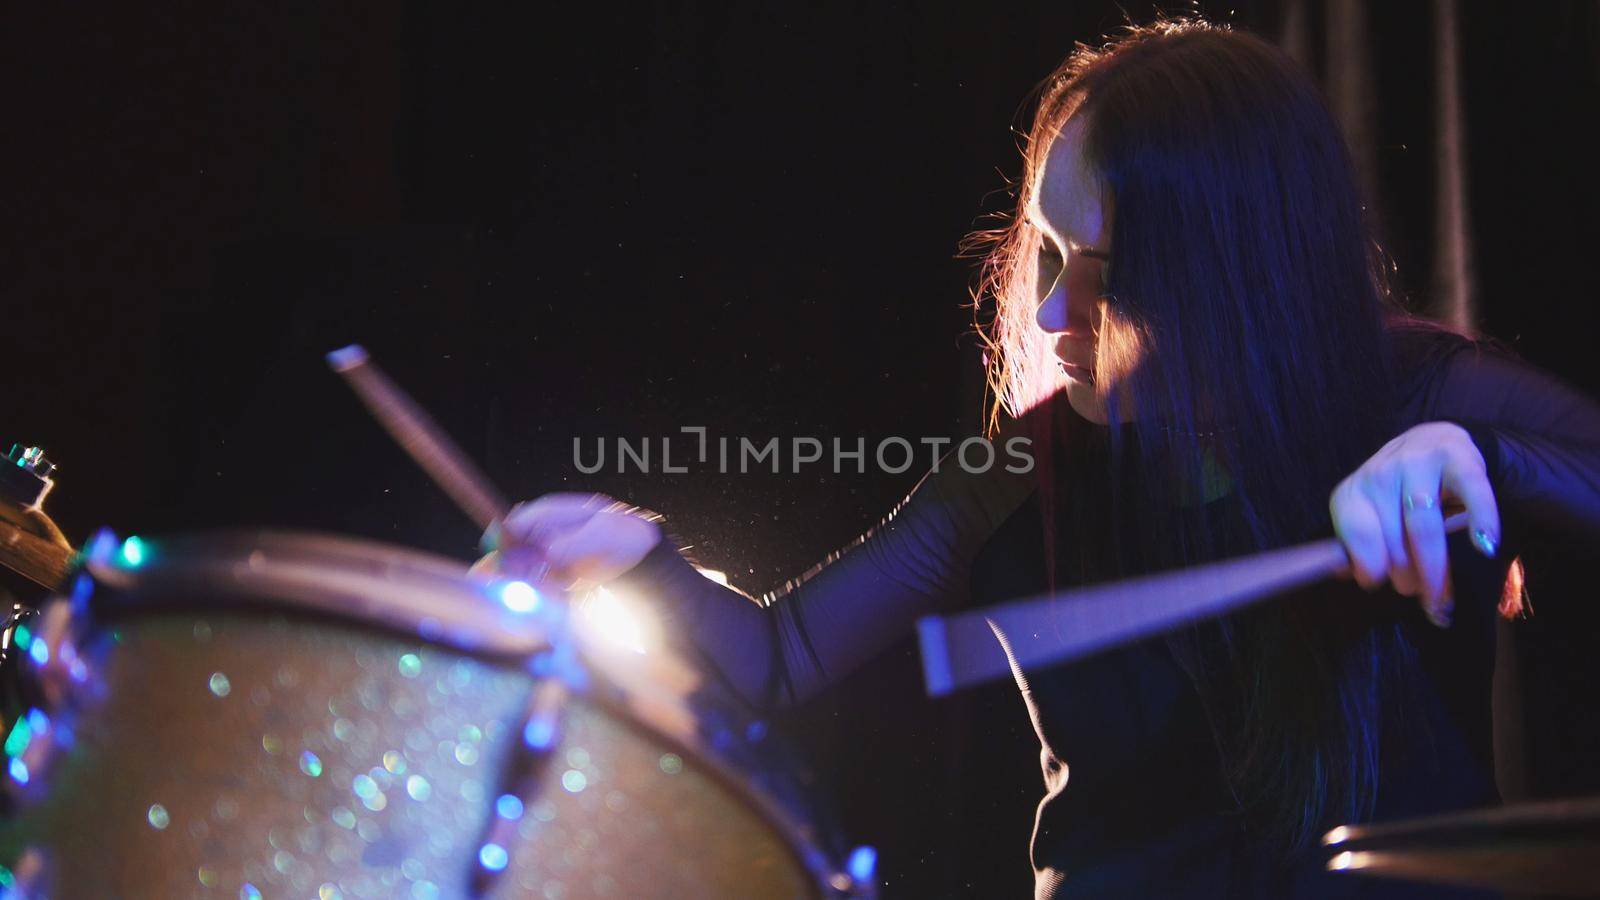 Passionate girl with long hair - percussion drummer perform music break down - teen rock music, telephoto